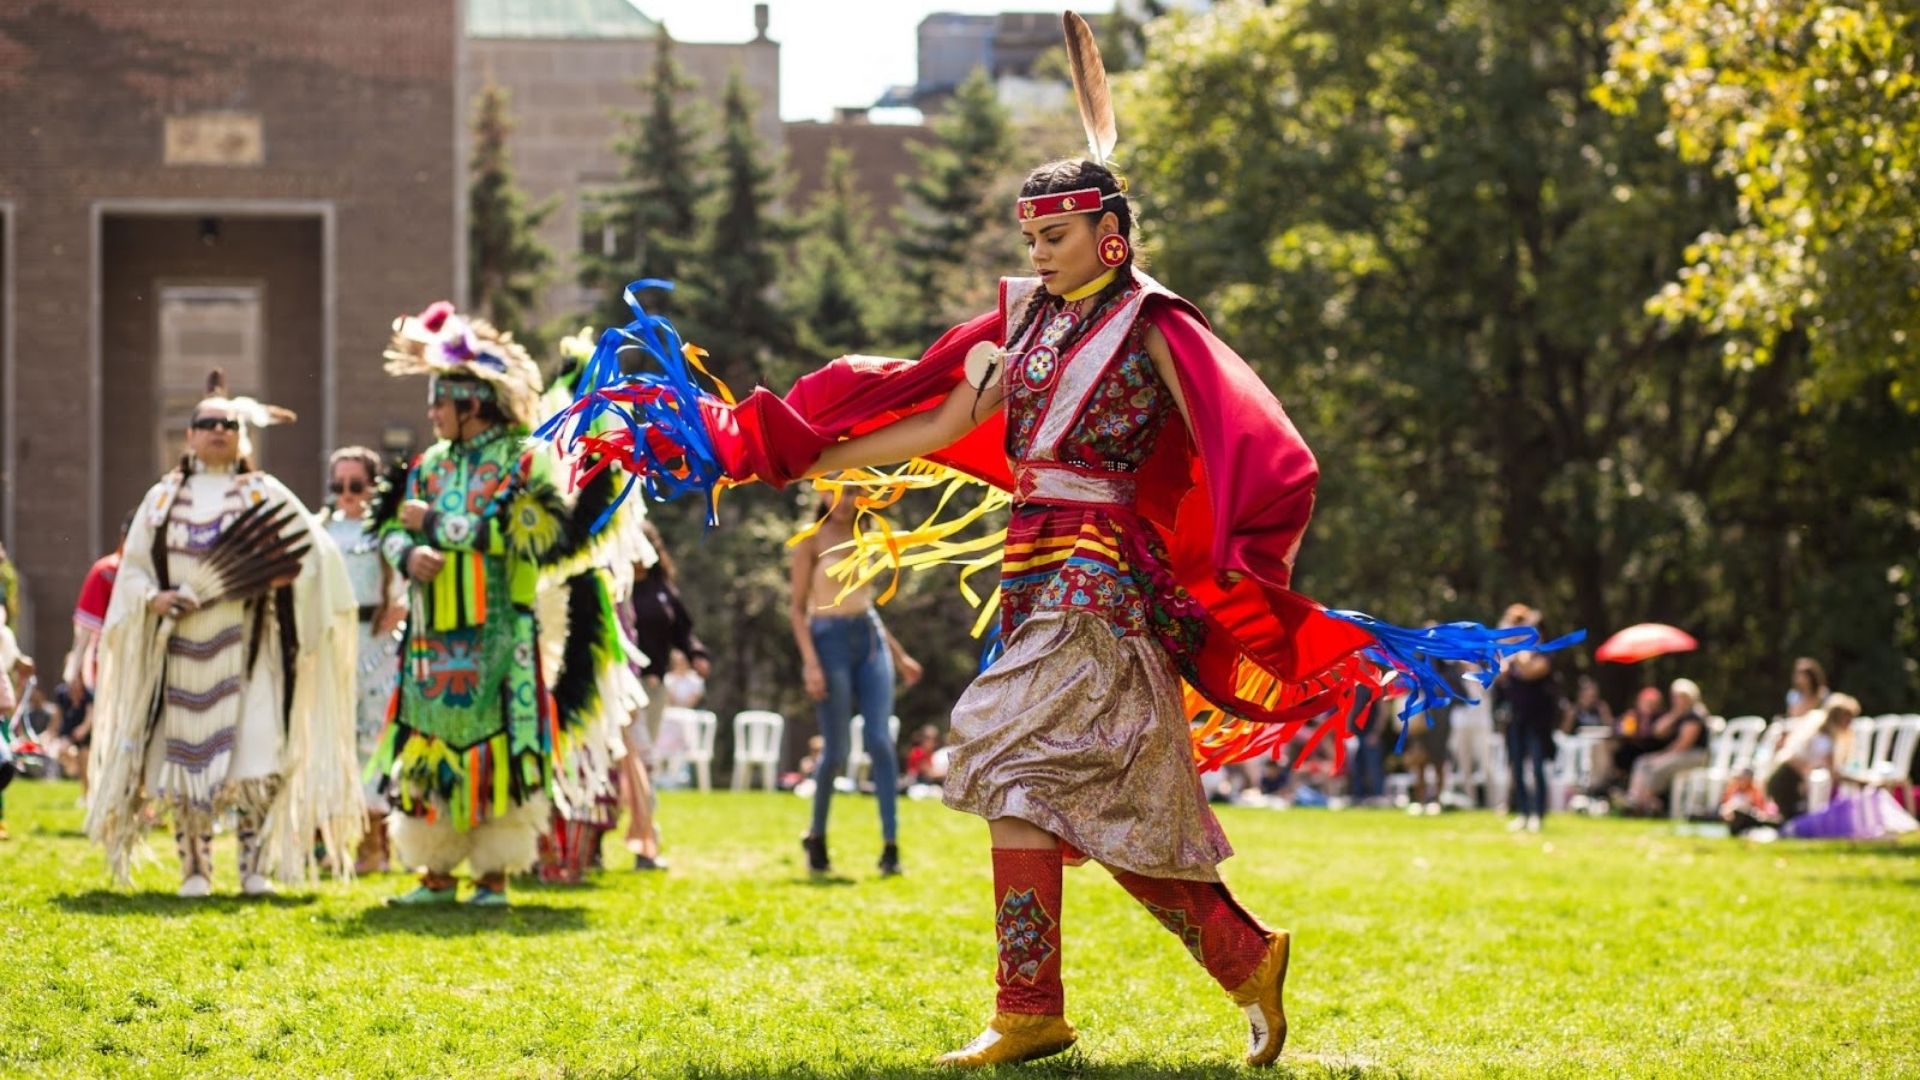 Indigenous Powwow dancer dressed in traditional outfit.